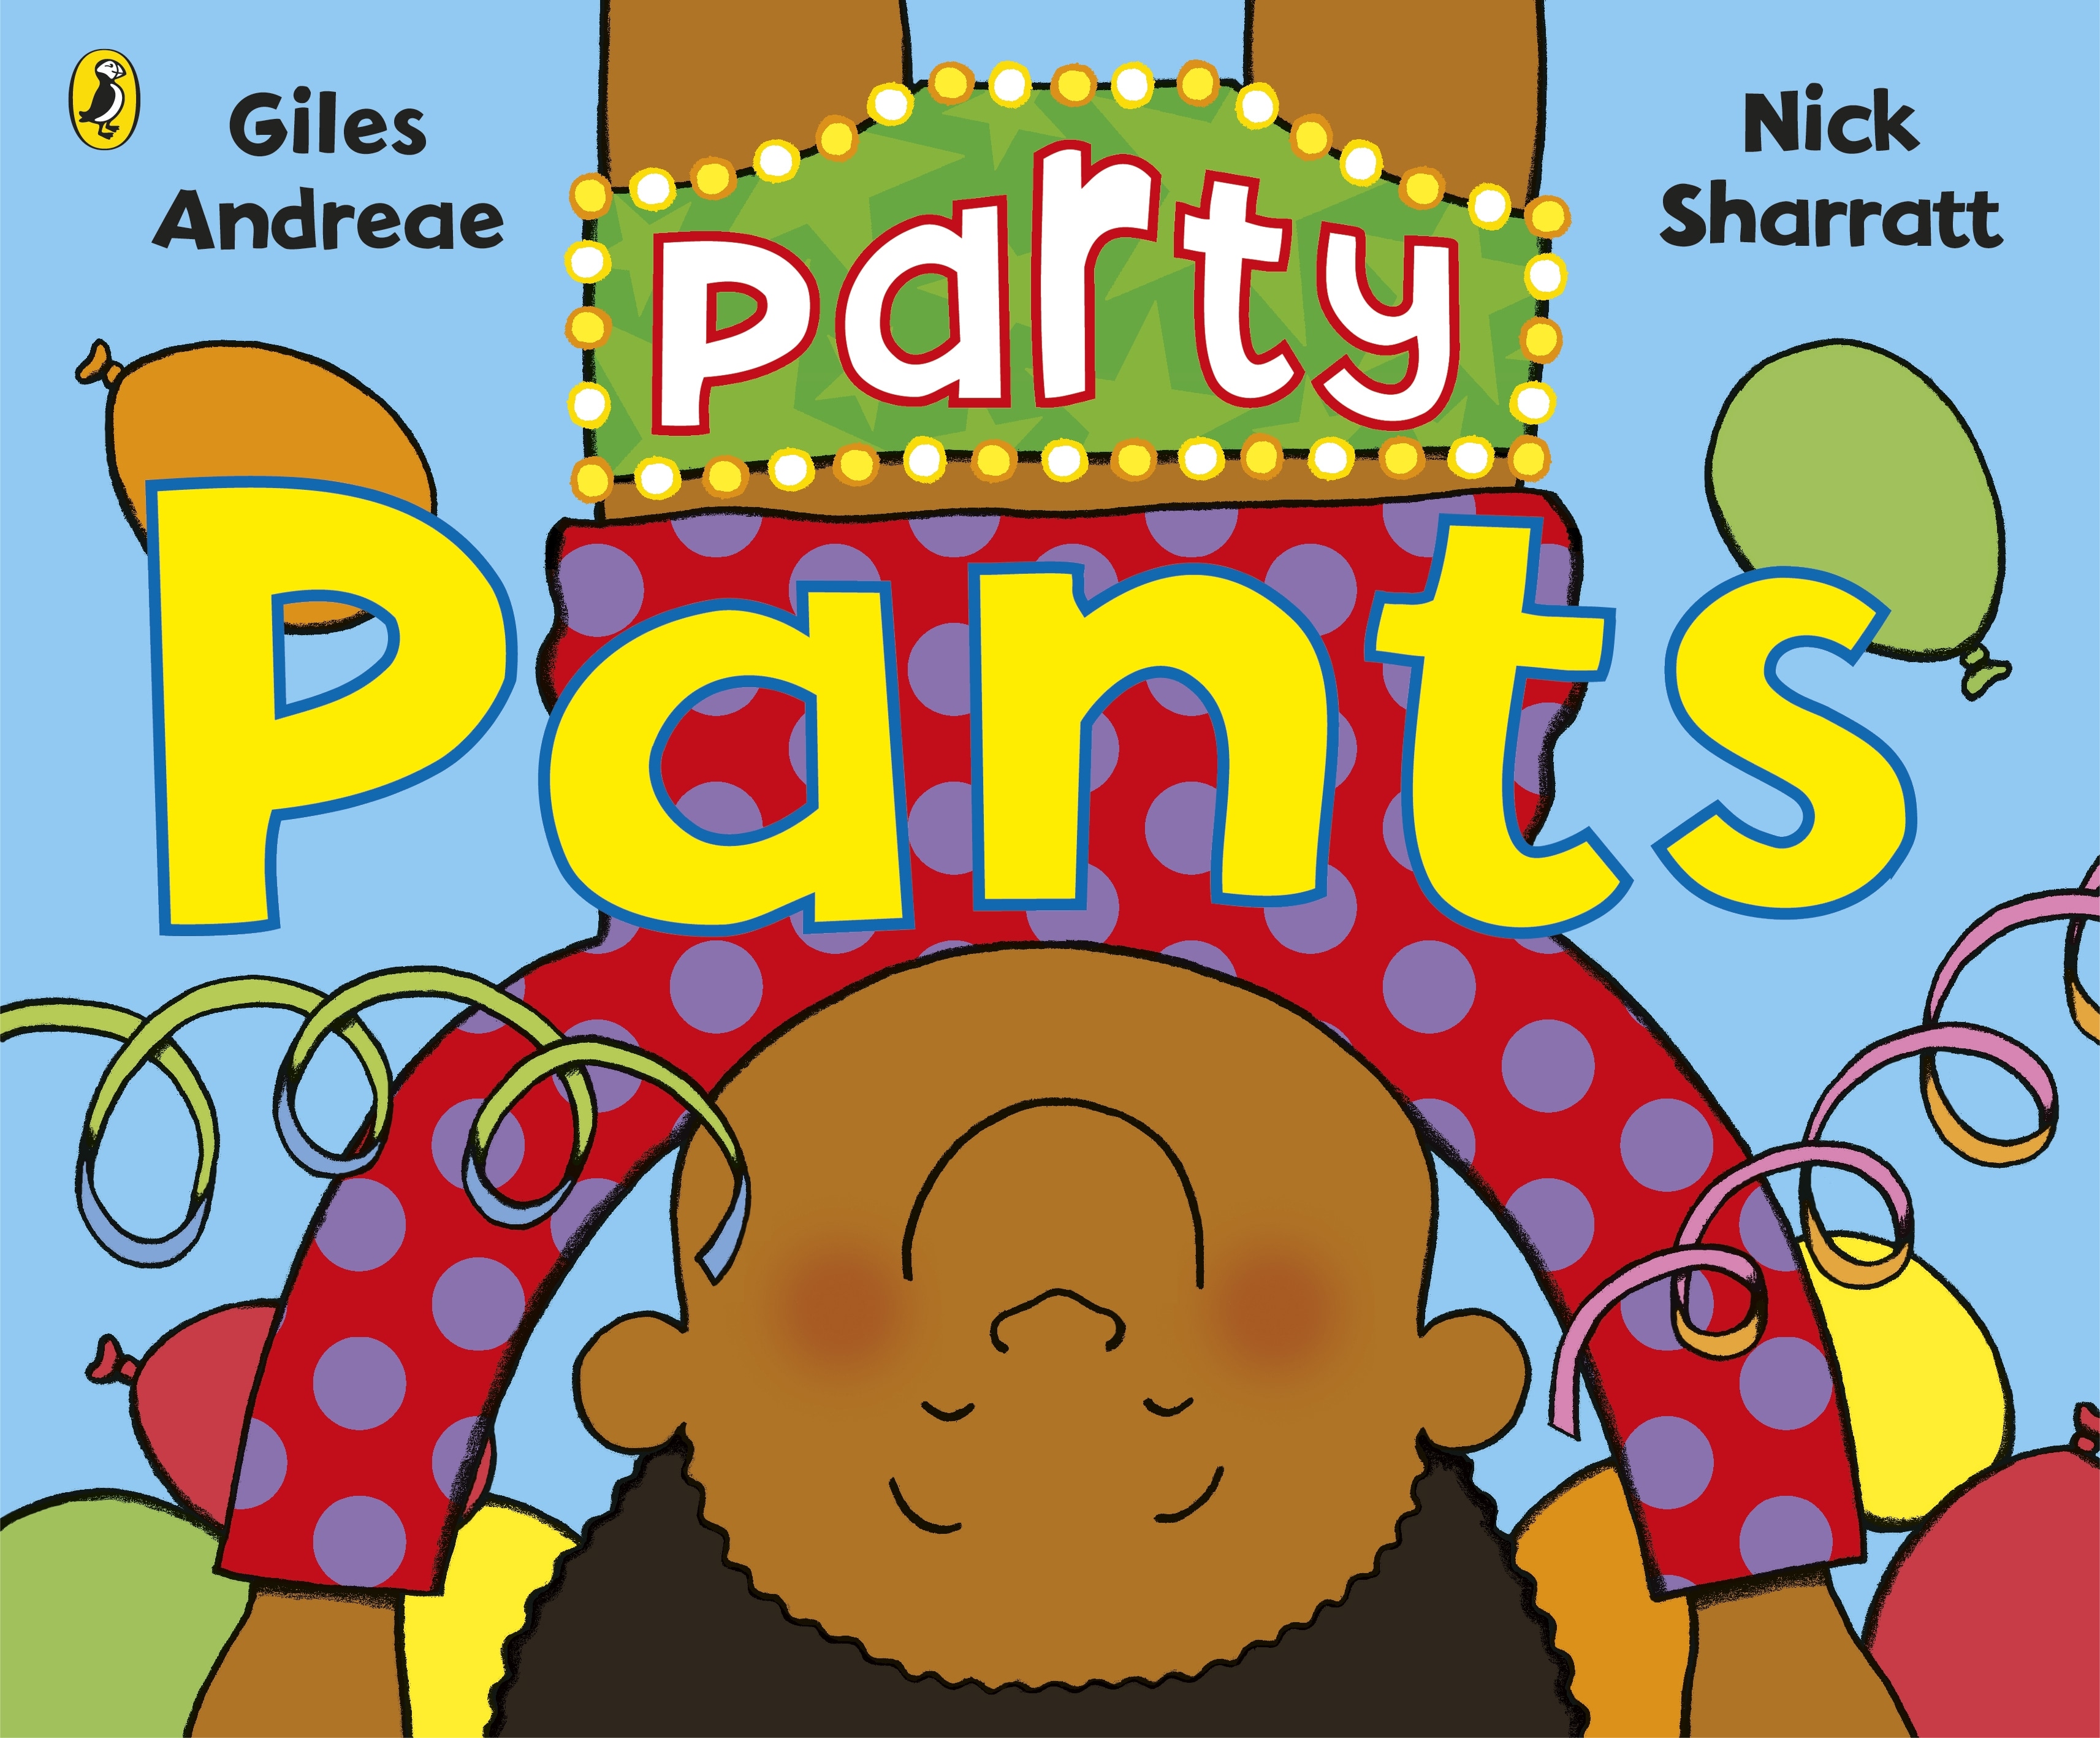 Book “Party Pants” by Giles Andreae, Nick Sharratt — August 22, 2019